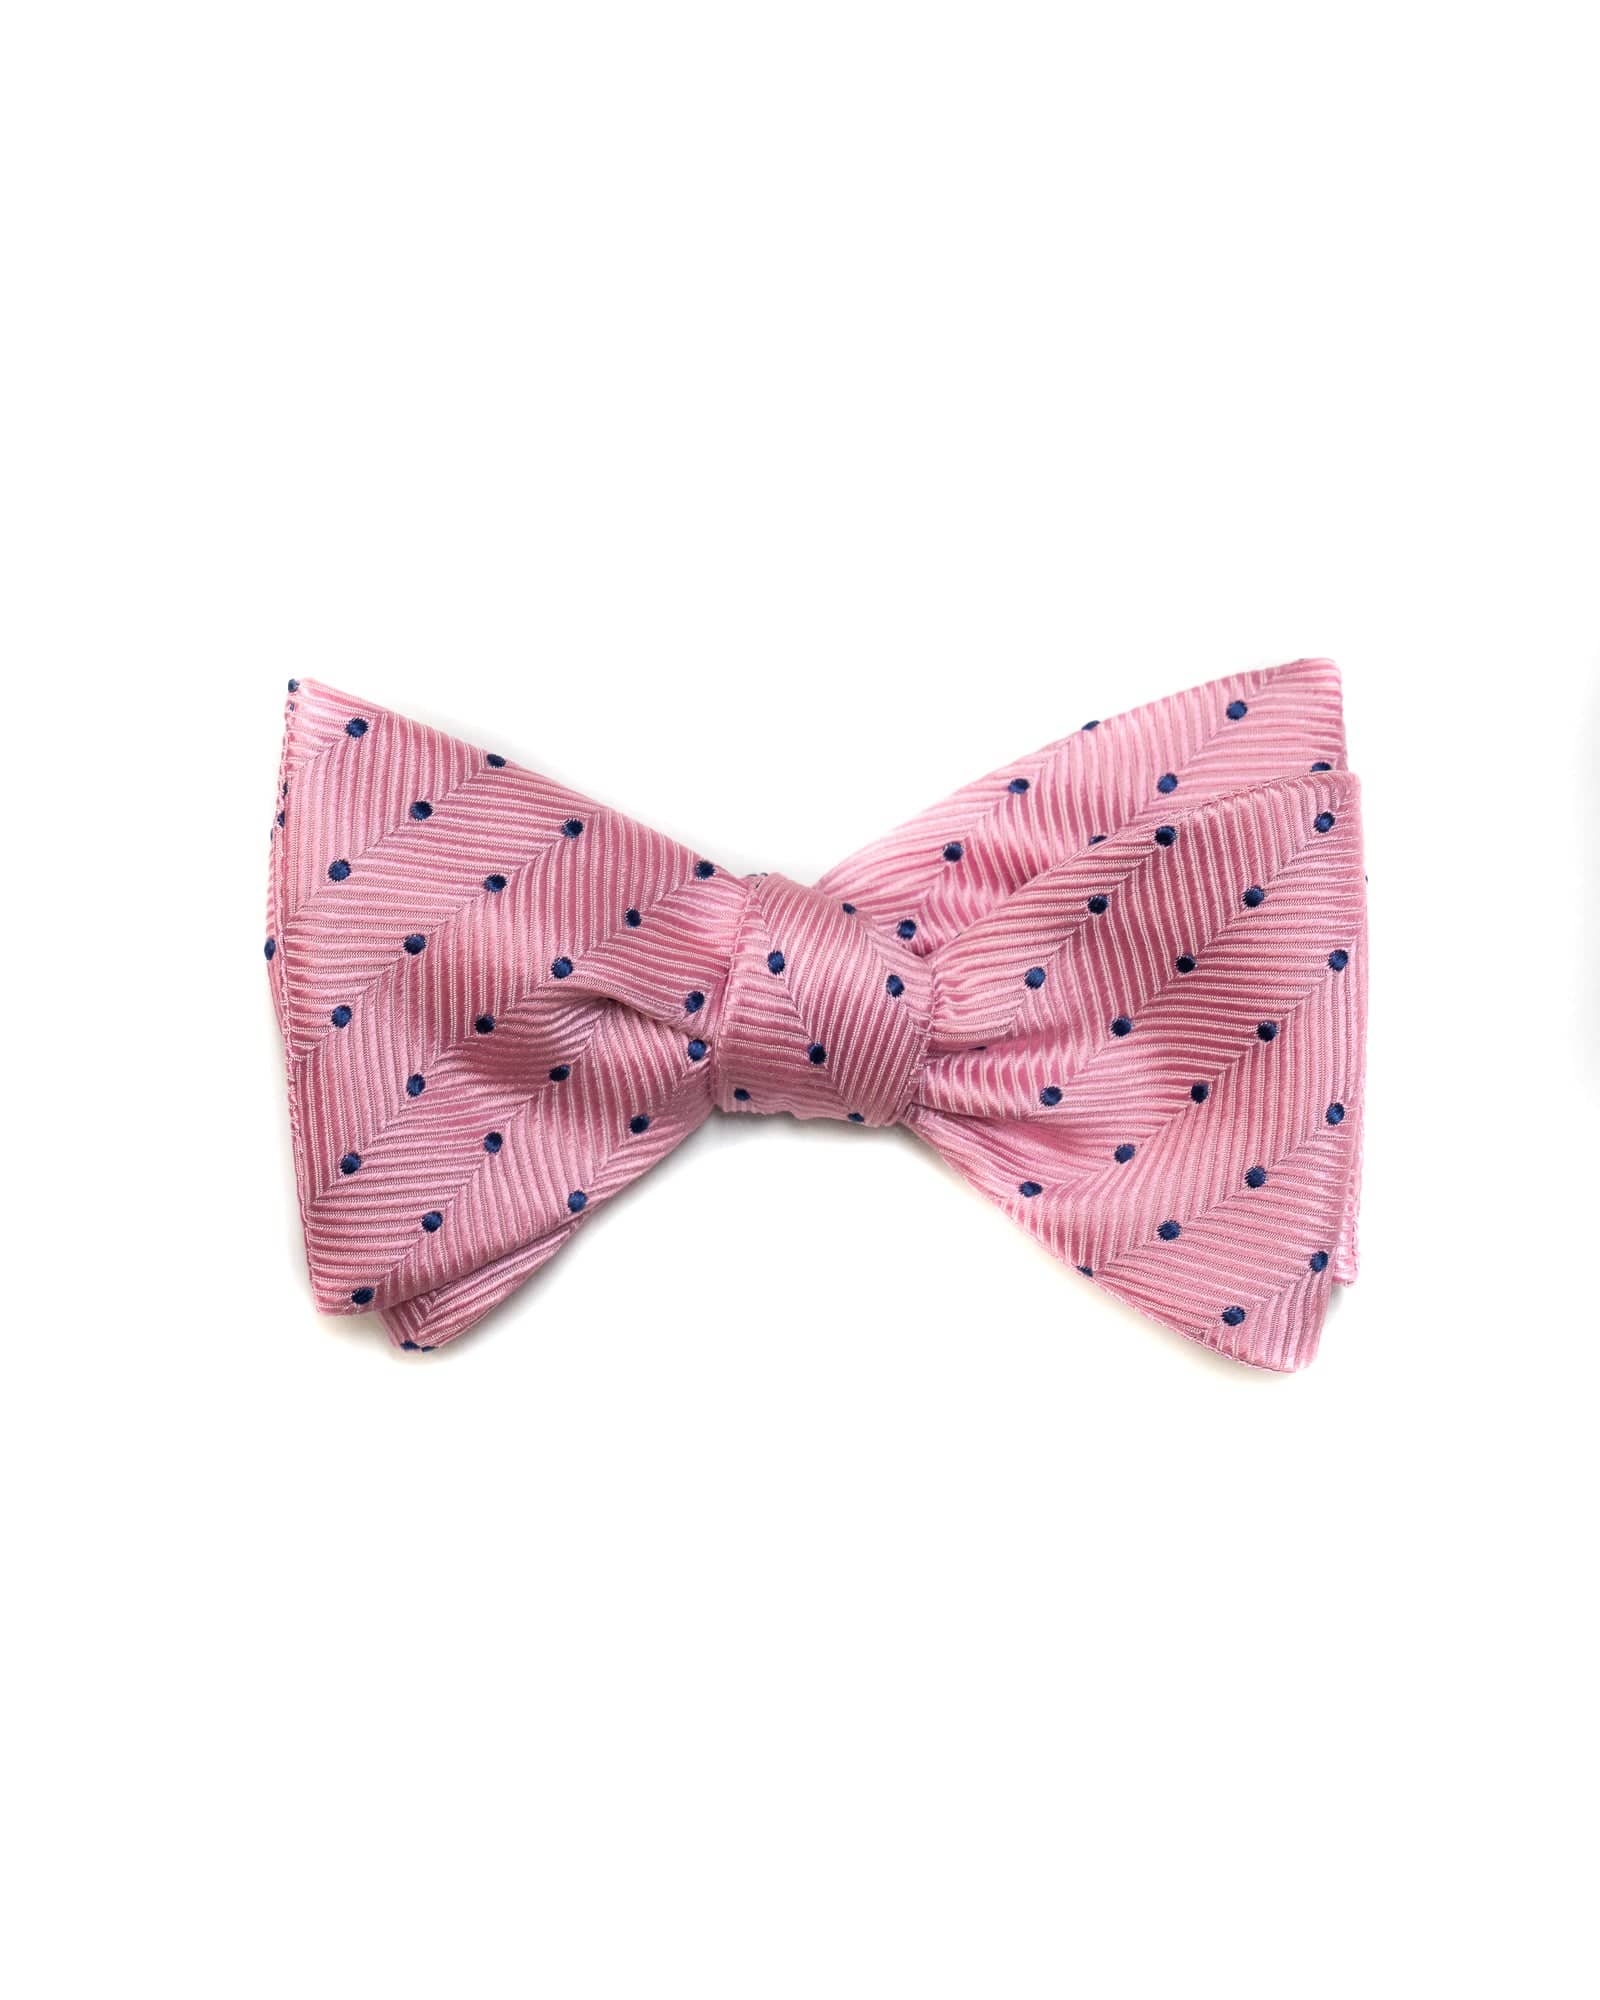 Self Tie All Silk Bow Tie In Pink With Navy Dot - Rainwater's Men's Clothing and Tuxedo Rental